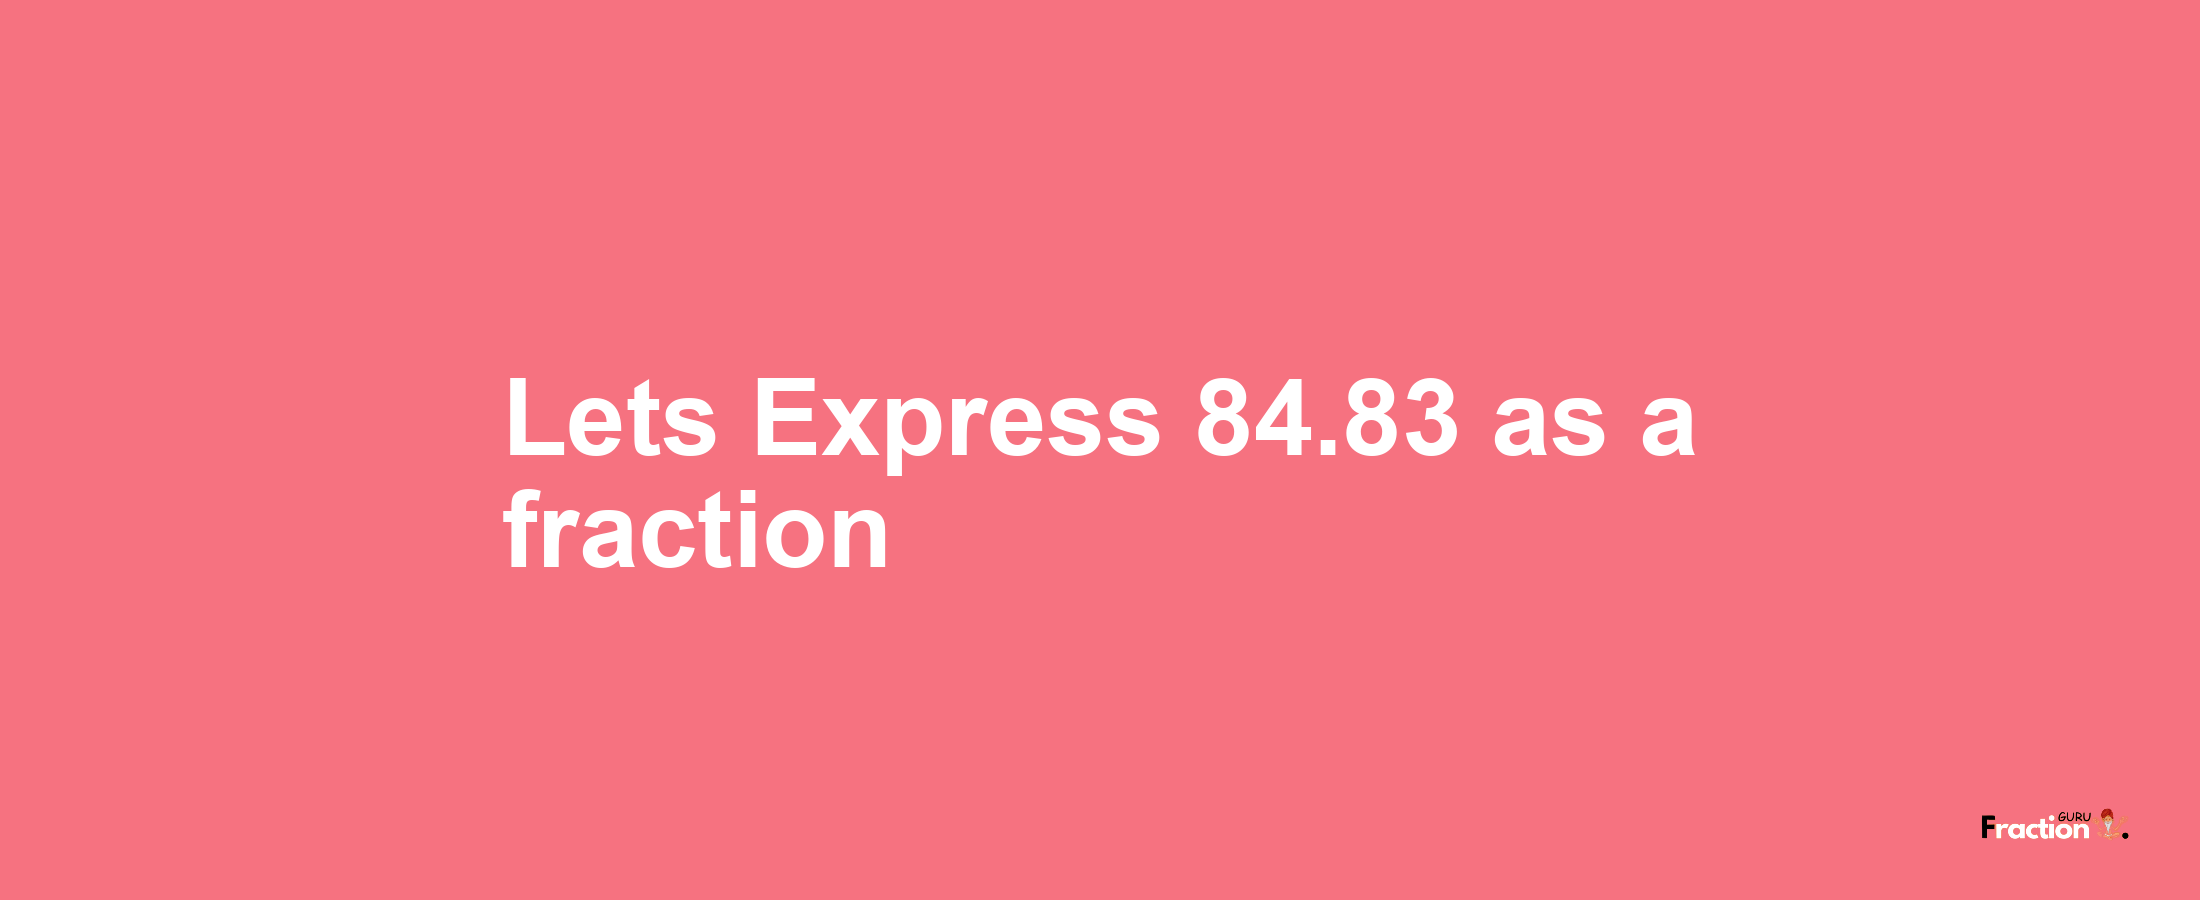 Lets Express 84.83 as afraction